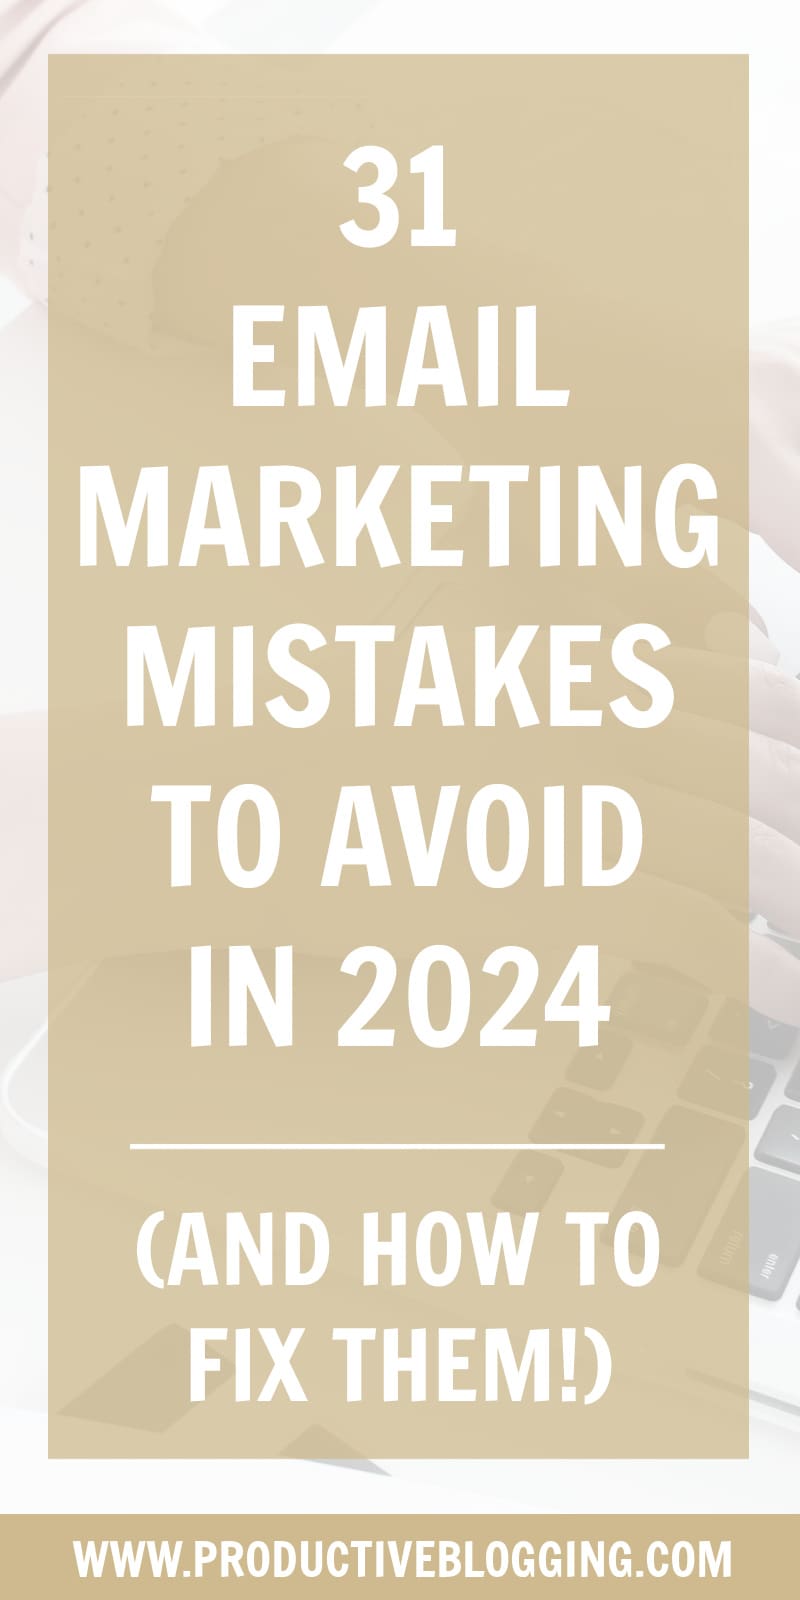 Email marketing is an essential part of blogging… but are you doing it right? Here are 31 Email Marketing Mistakes to avoid in 2024 (and how to fix them!) #emailmarketing #emailmarketingtips #emailmarketingforbloggers #emailmarketingmistakes #emailmarketing2024 #bloggingtips #blogging #bloggers #emaillist #listbuilding #subscribers #convertkit #makemoneyblogging #bloggingformoney #productivity #productivitytips #productivityhacks #productivityhabits #productiveblogging